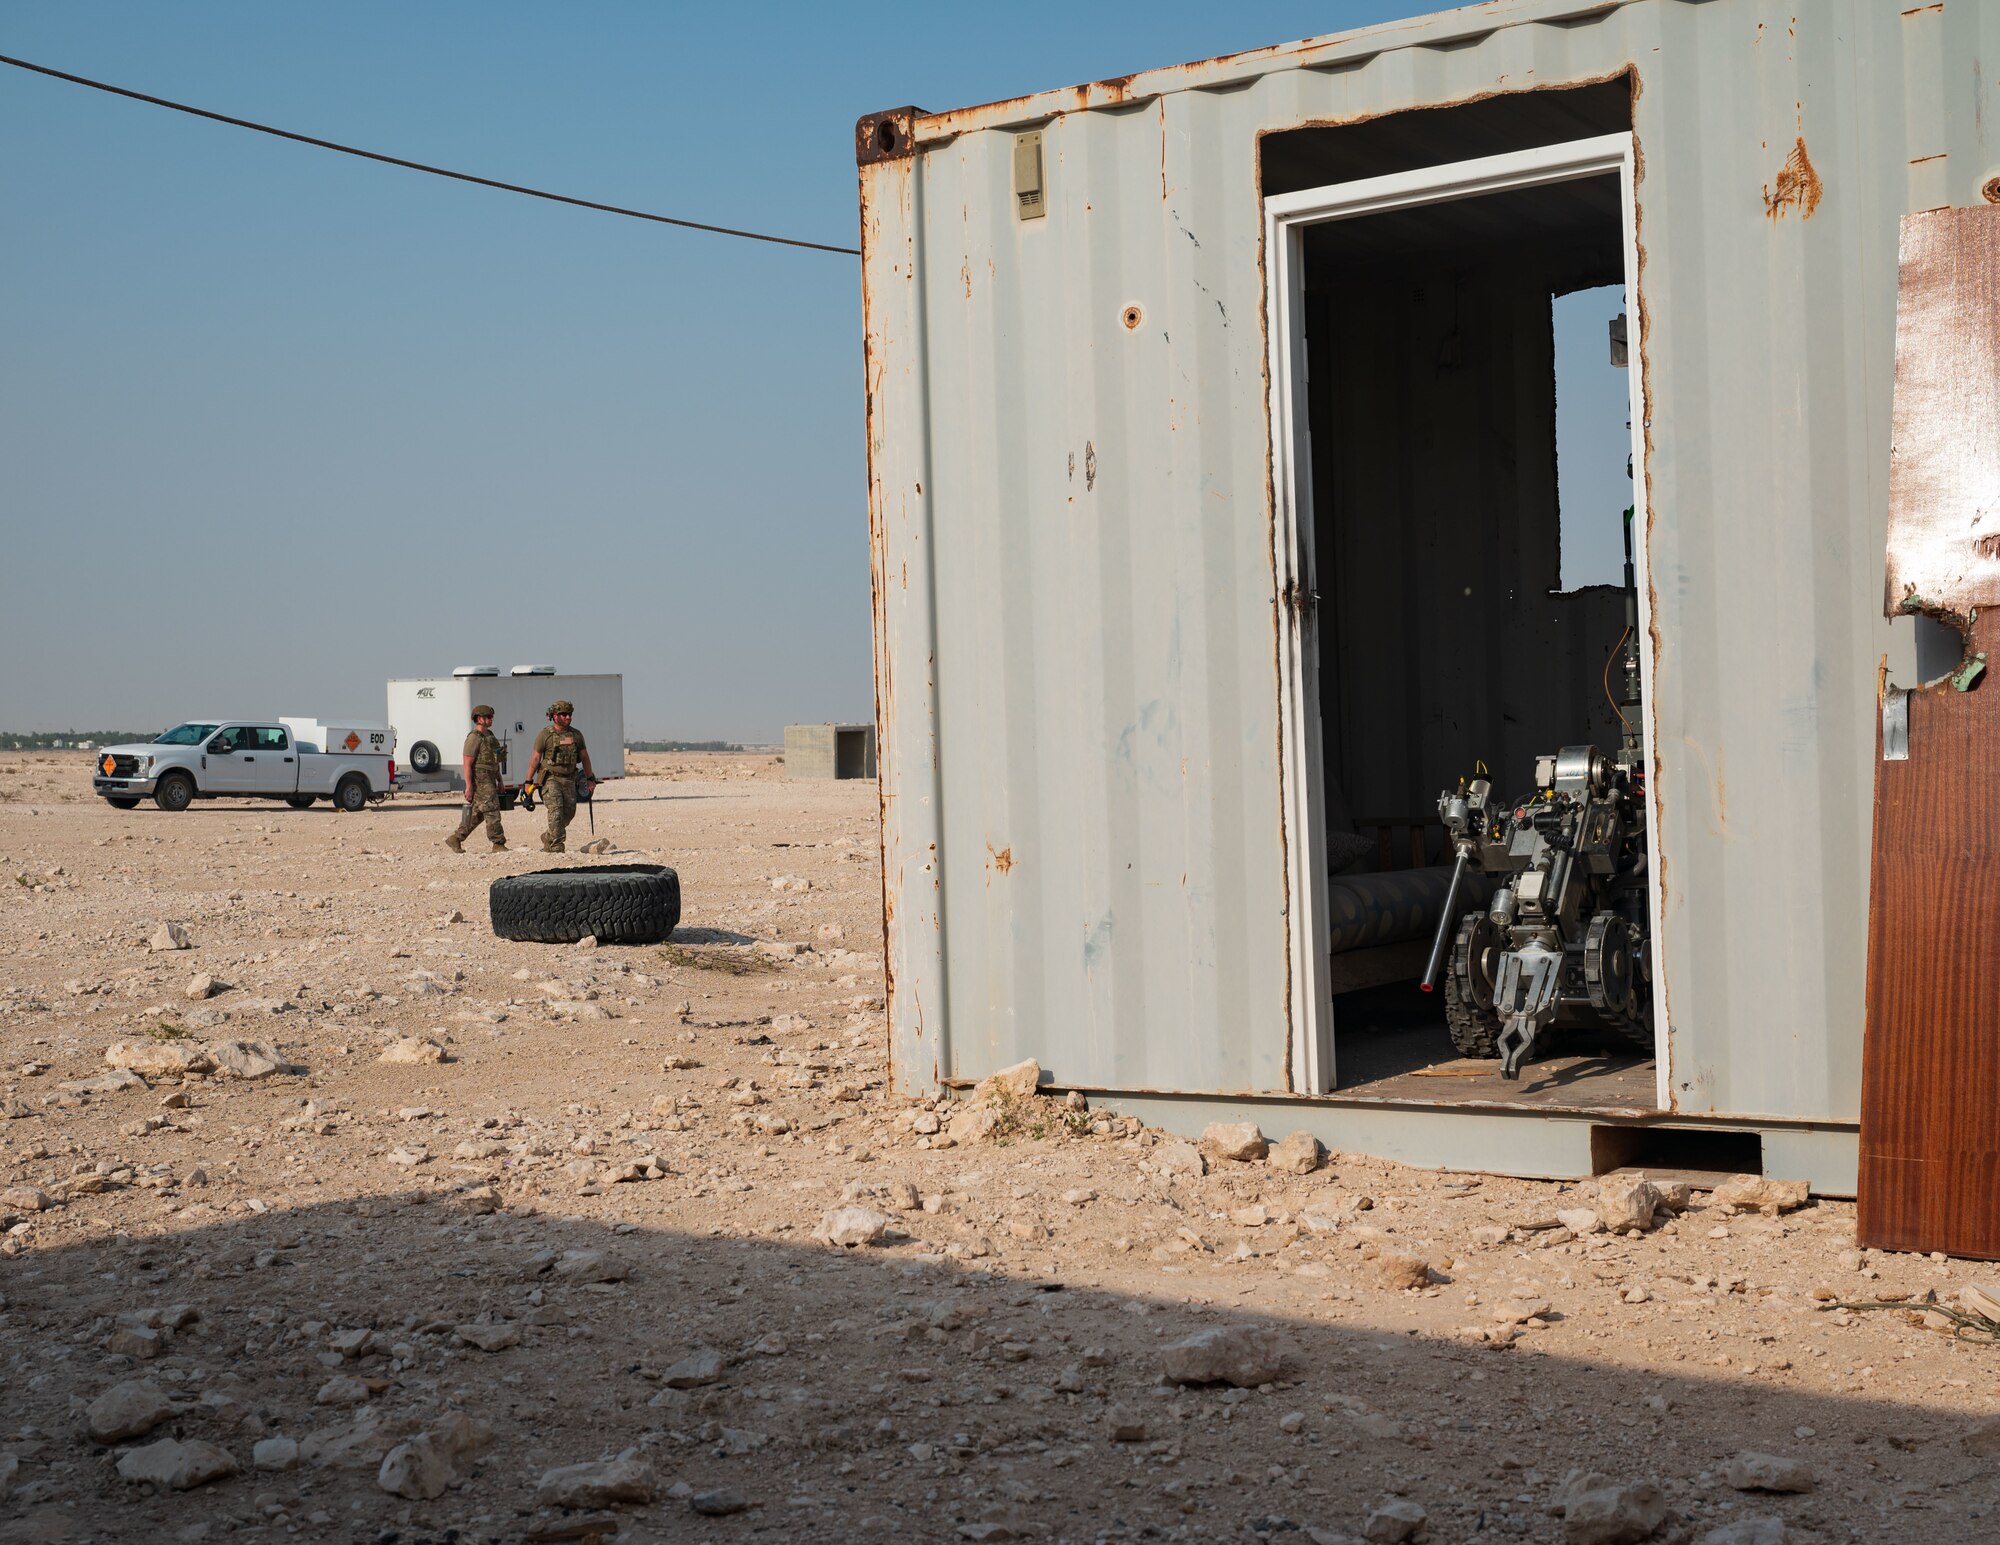 U.S. Air Force Staff Sgts. Cory Lessard and Daniel Simmons, Explosive Ordnance Disposal technicians from 379th Expeditionary Civil Engineer Squadron, approach the simulated explosion zone during an exercise Aug. 24, 2022 at Al Udeid Air Base, Qatar. The robot in the foreground allowed for Lessard and Simmons to examine and evaluate the threat level of the explosion zone from a safe distance prior to making their approach. (U.S. Air Force photo by Staff Sgt. Dana Tourtellotte)